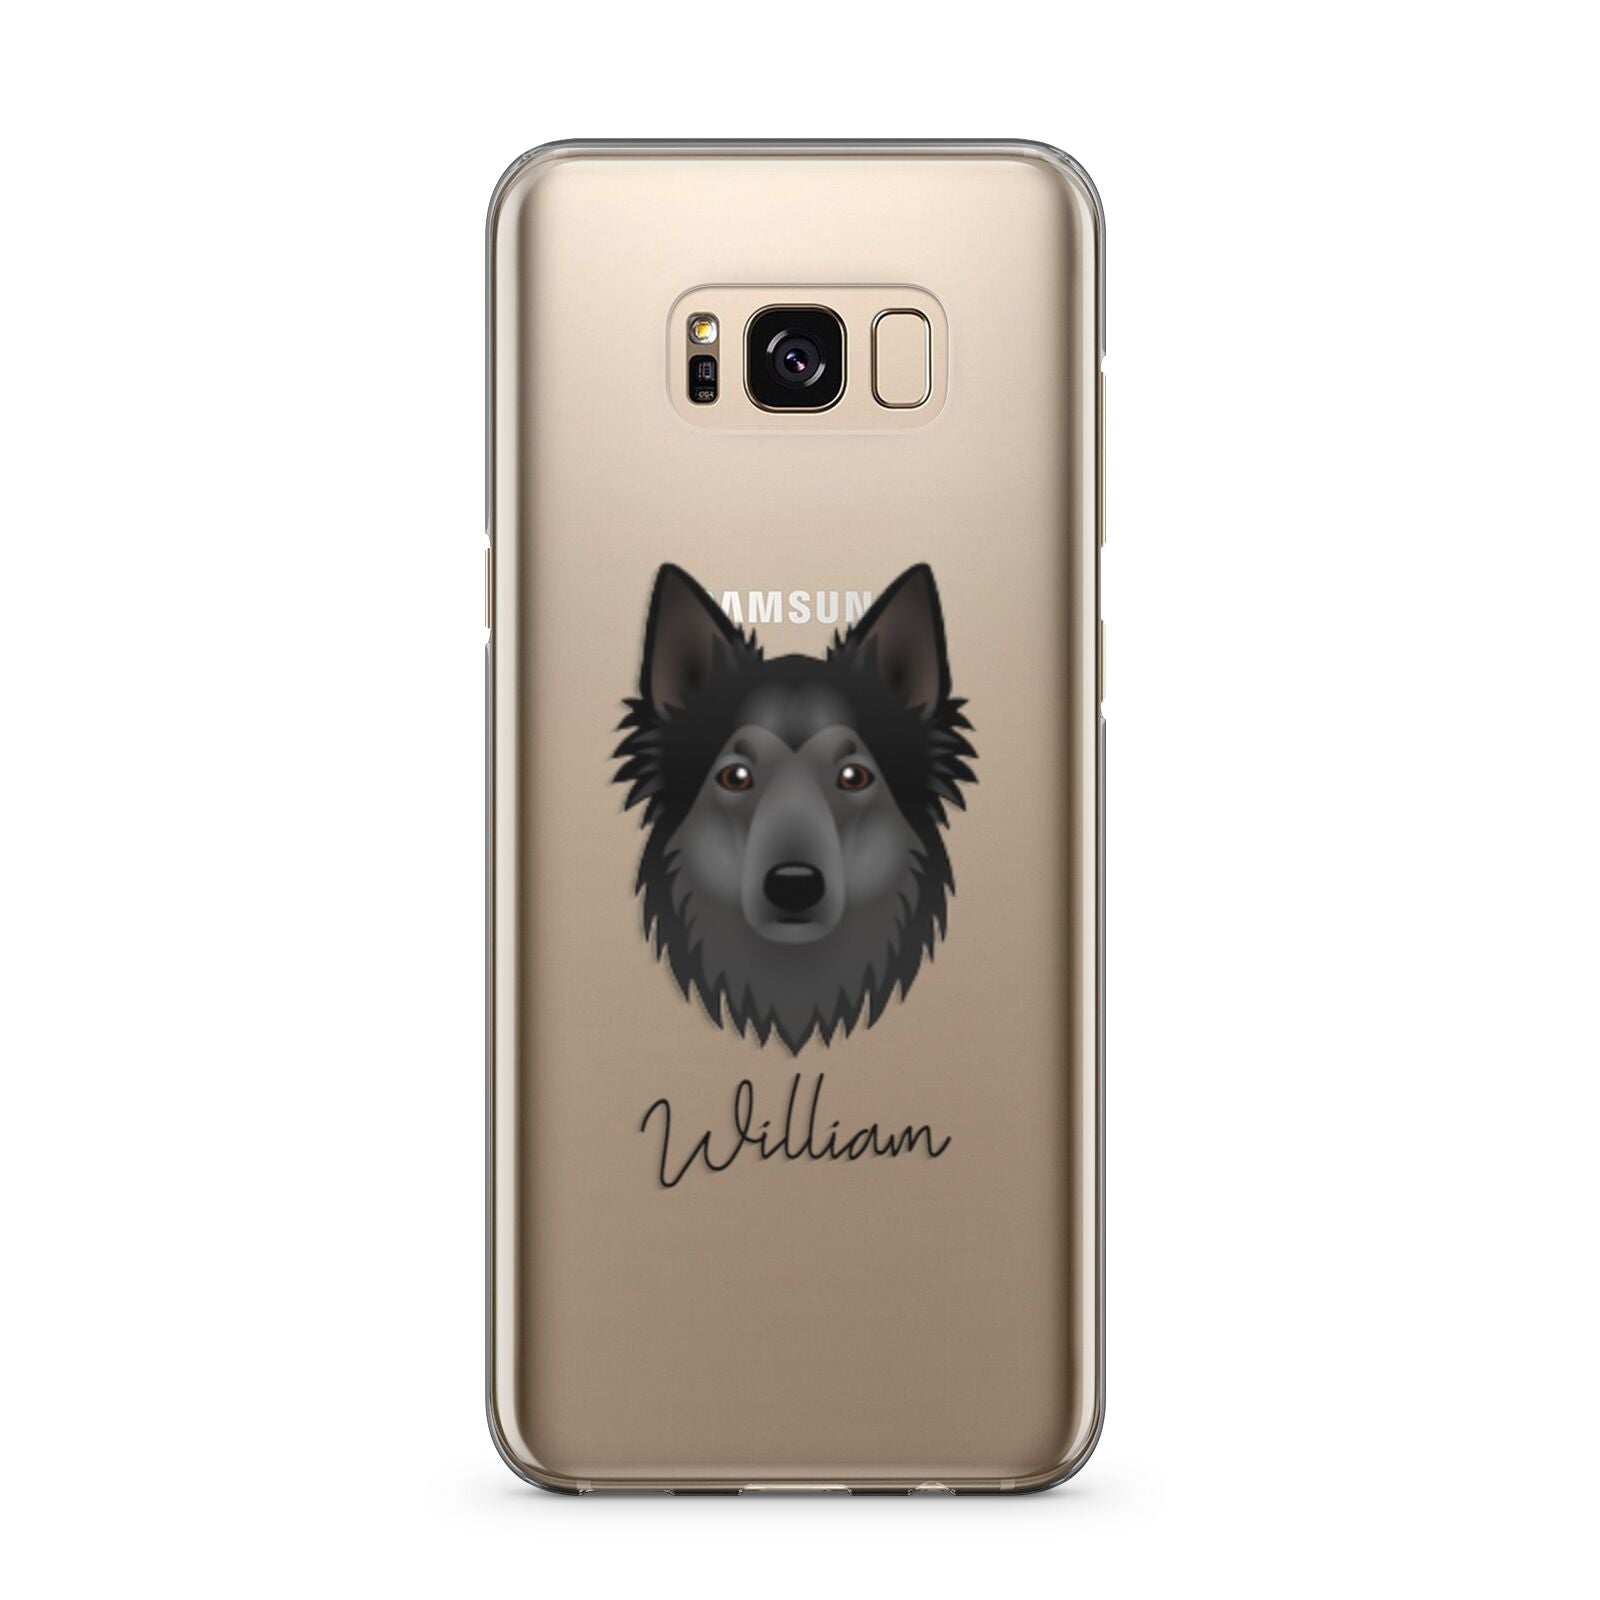 Shollie Personalised Samsung Galaxy S8 Plus Case